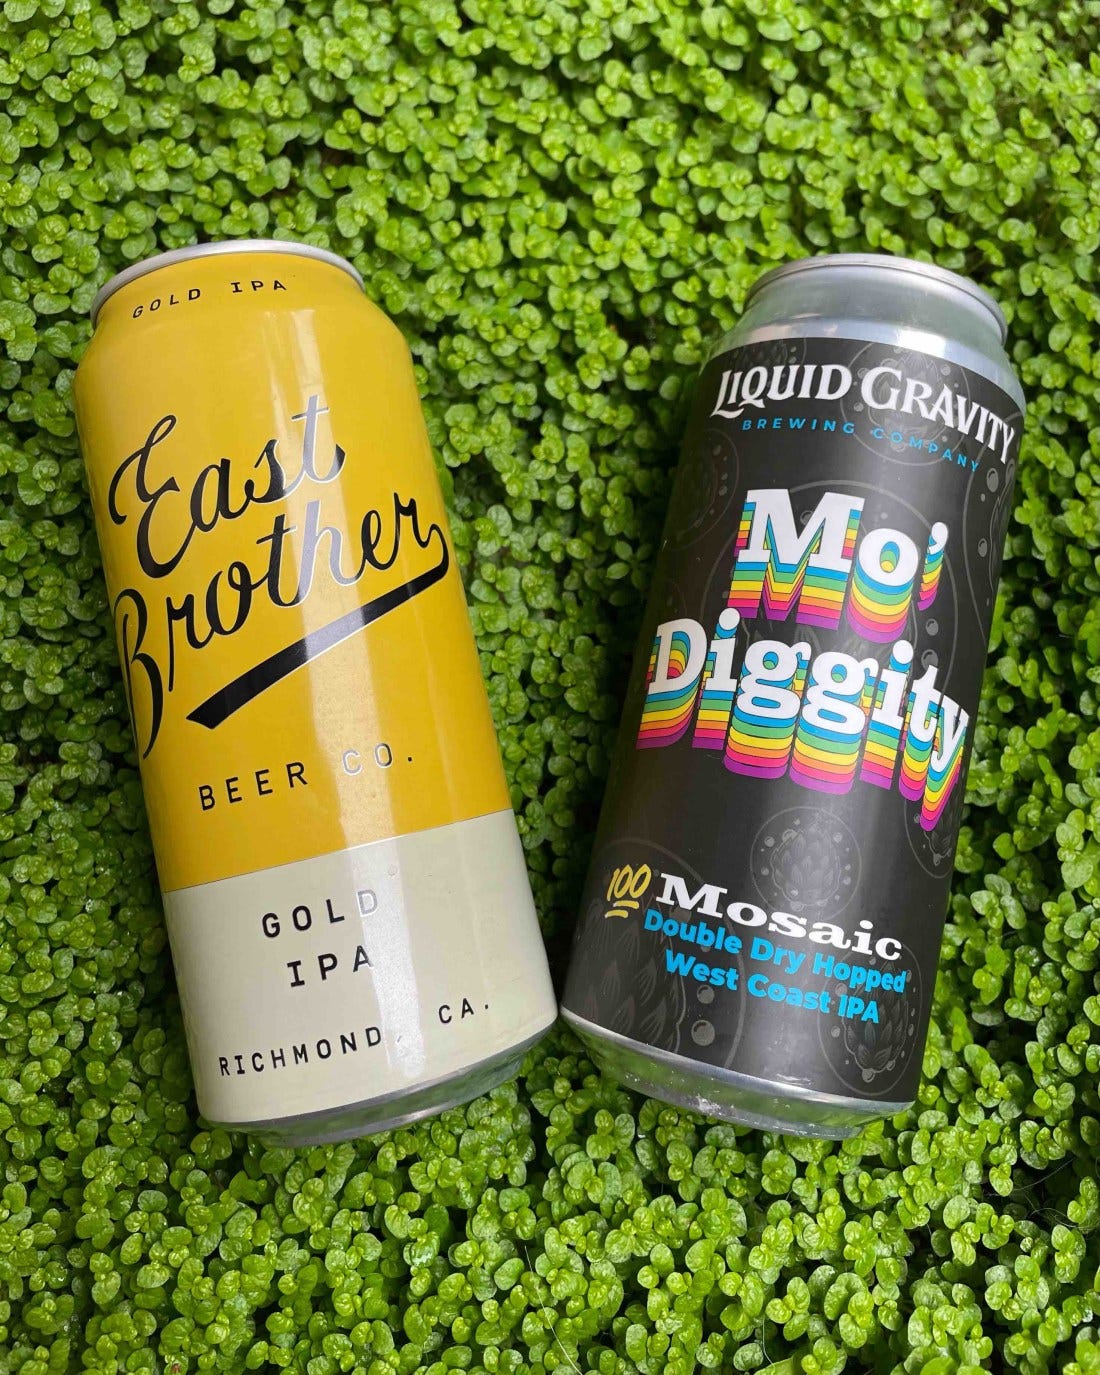 East Brother Brewing Gold IPA and Liquid Gravity Mo Diggity DDH IPA
